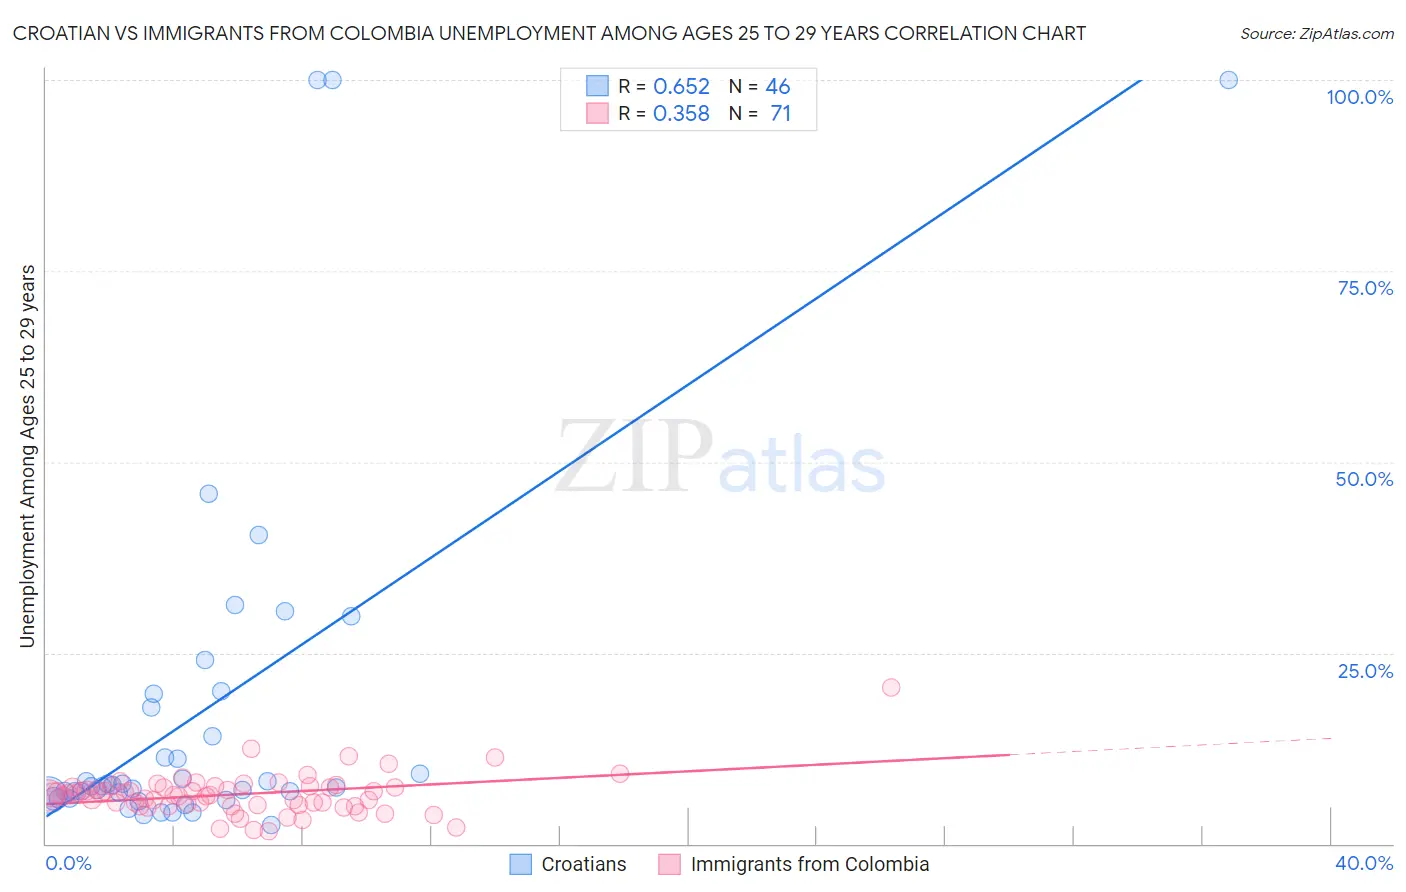 Croatian vs Immigrants from Colombia Unemployment Among Ages 25 to 29 years